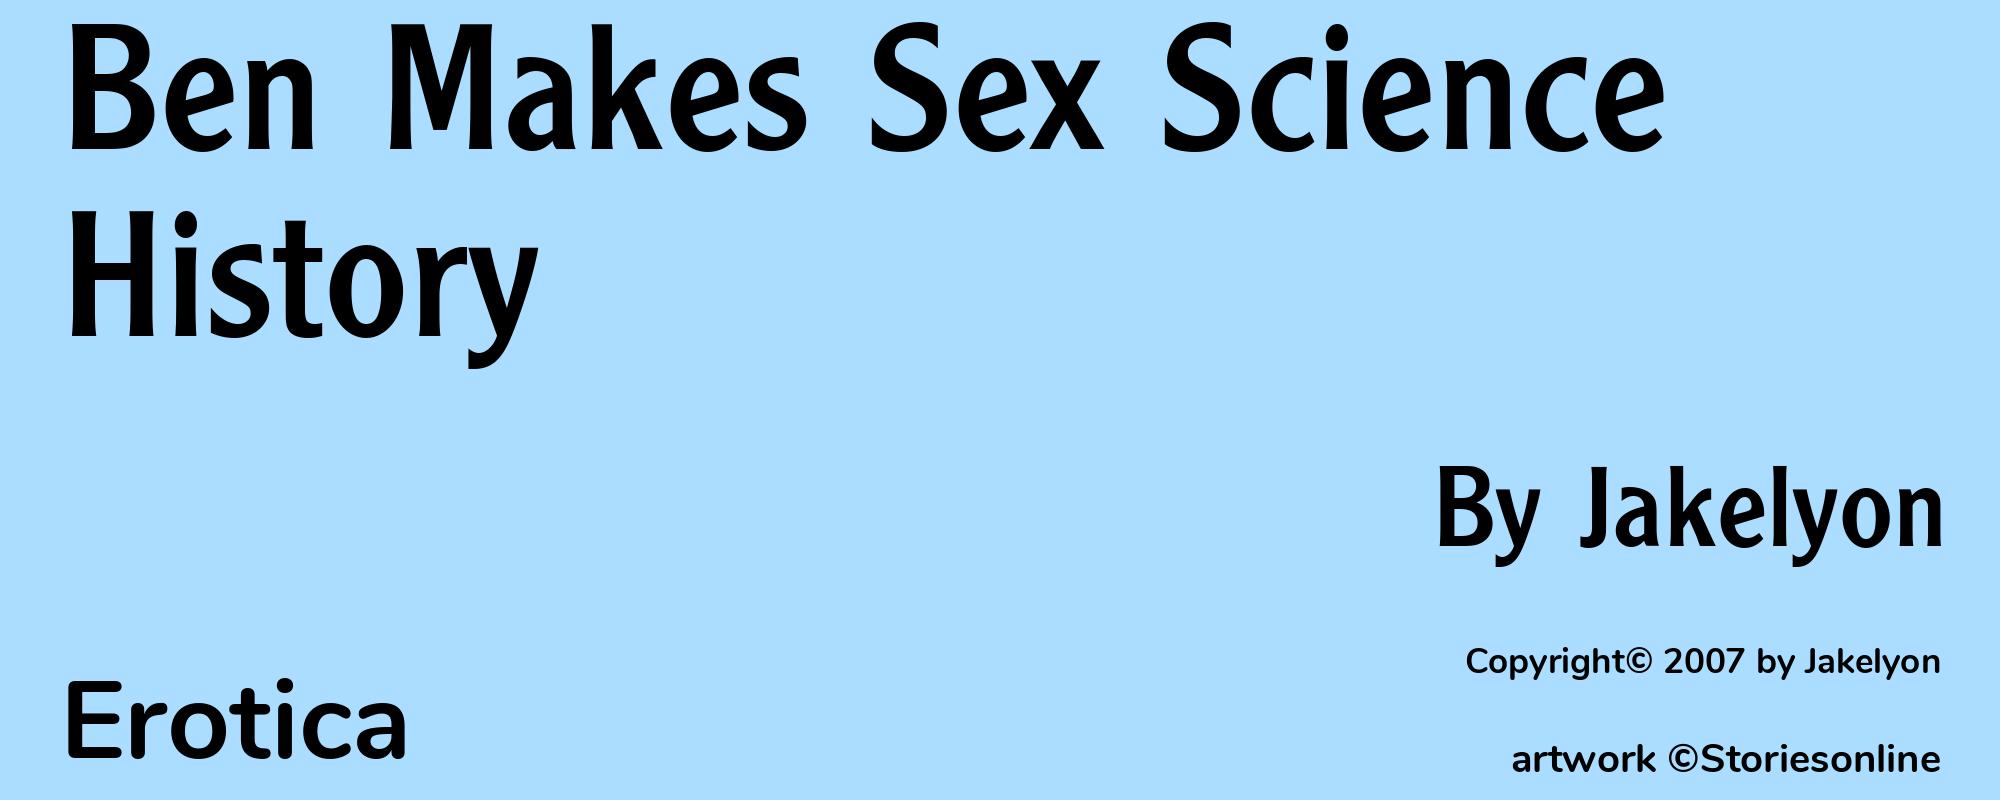 Ben Makes Sex Science History - Cover